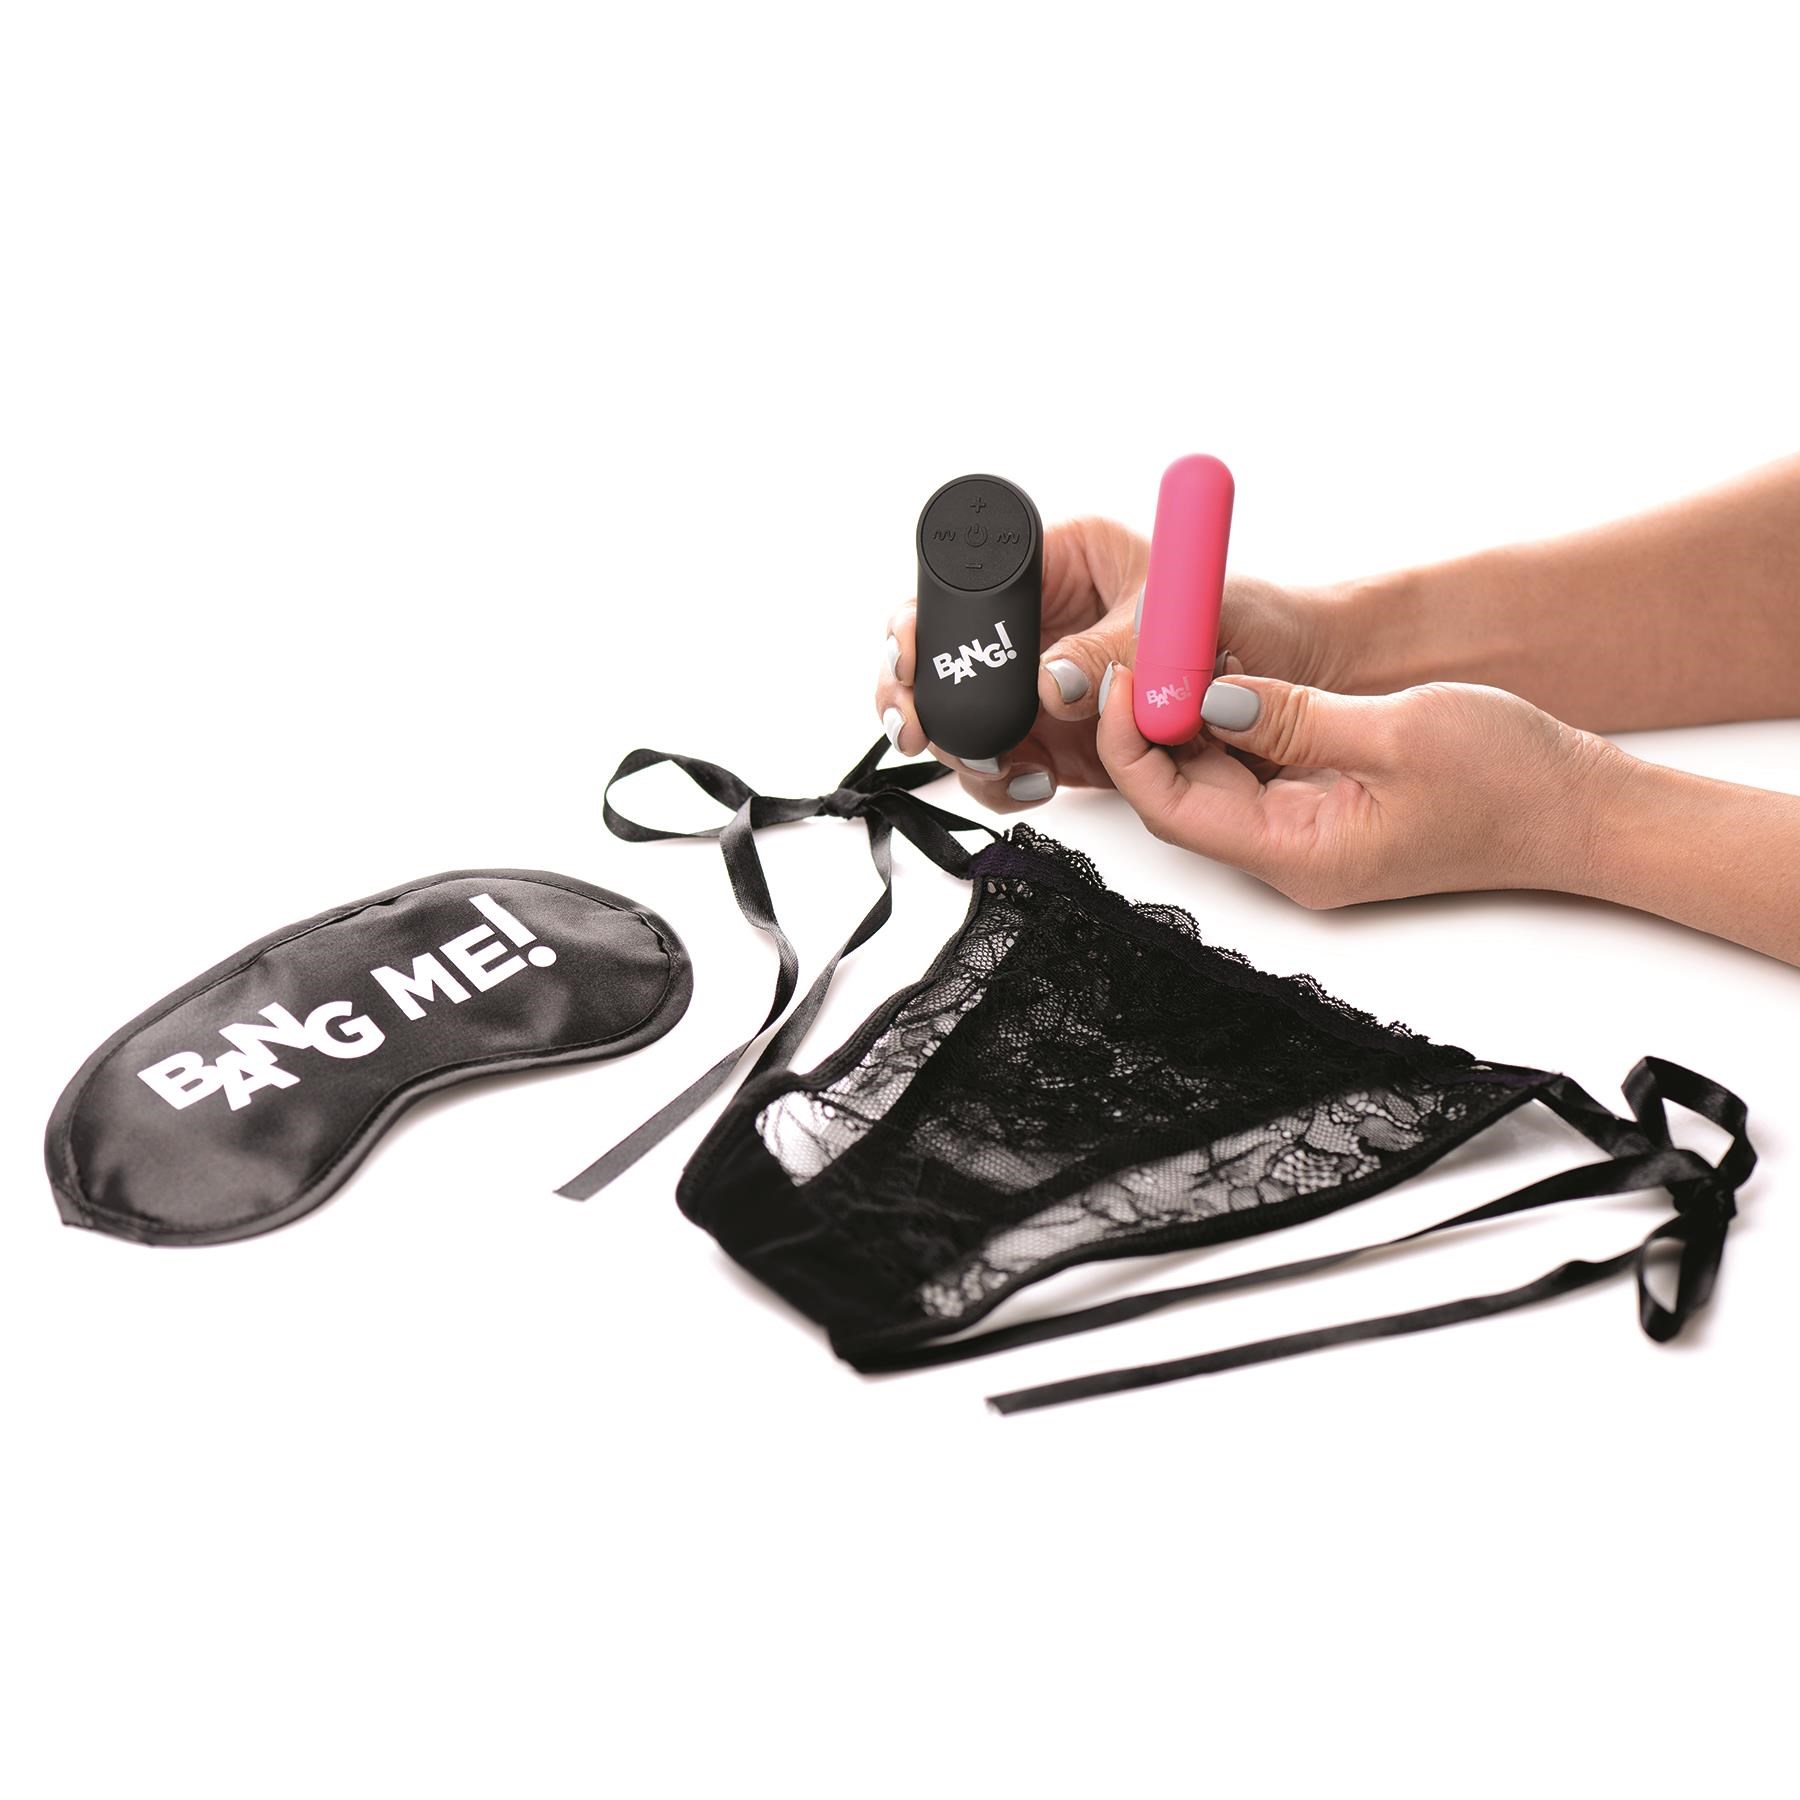 Bang! Power Panty Kit - All Components with Hand Shot of Bullet and Remote